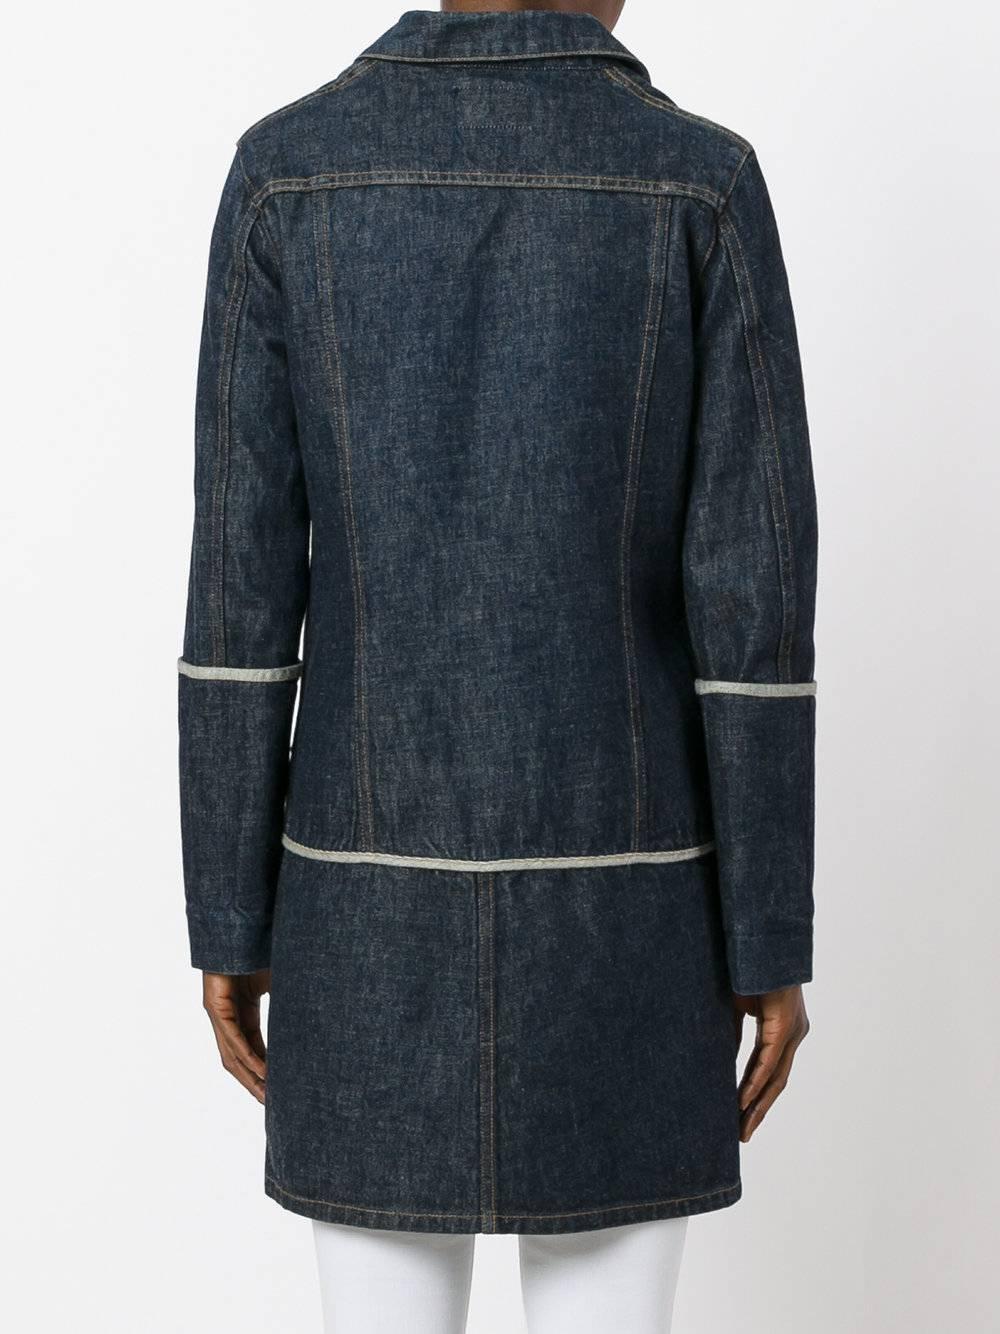 Blue cotton 1997 denim coat from Helmut Lang Vintage featuring a pointed collar, hidden buttons fastening, long sleeves, flap pockets, gold-tone braided details and a single breasted straight cut 

Outer Composition:
cotton 100%

IT-40